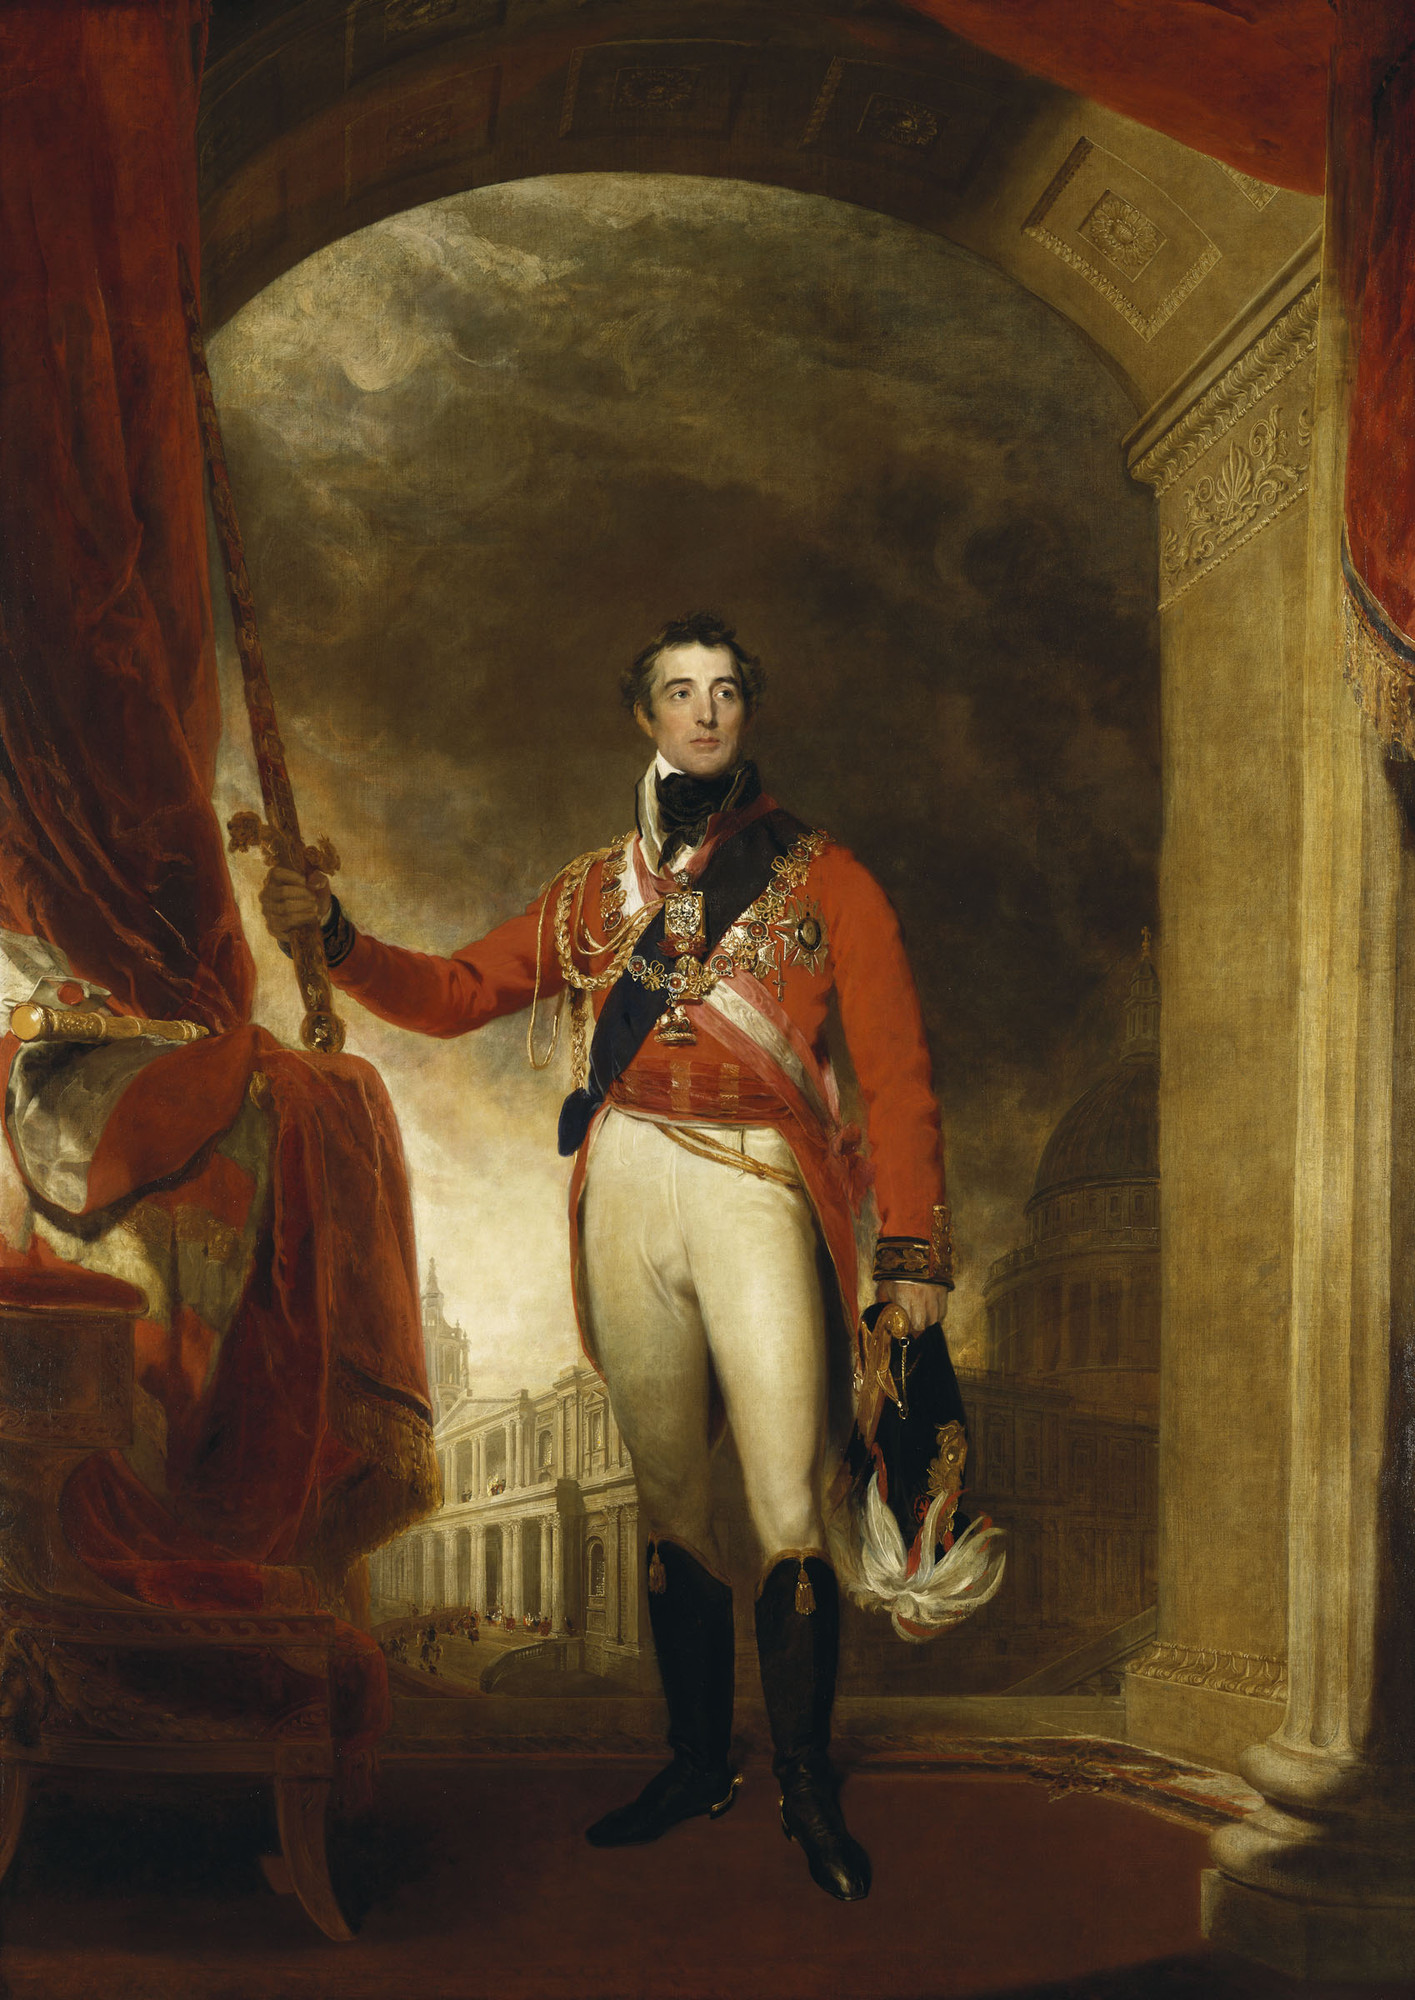 The Duke of Wellington by Lawrence, 1814-15